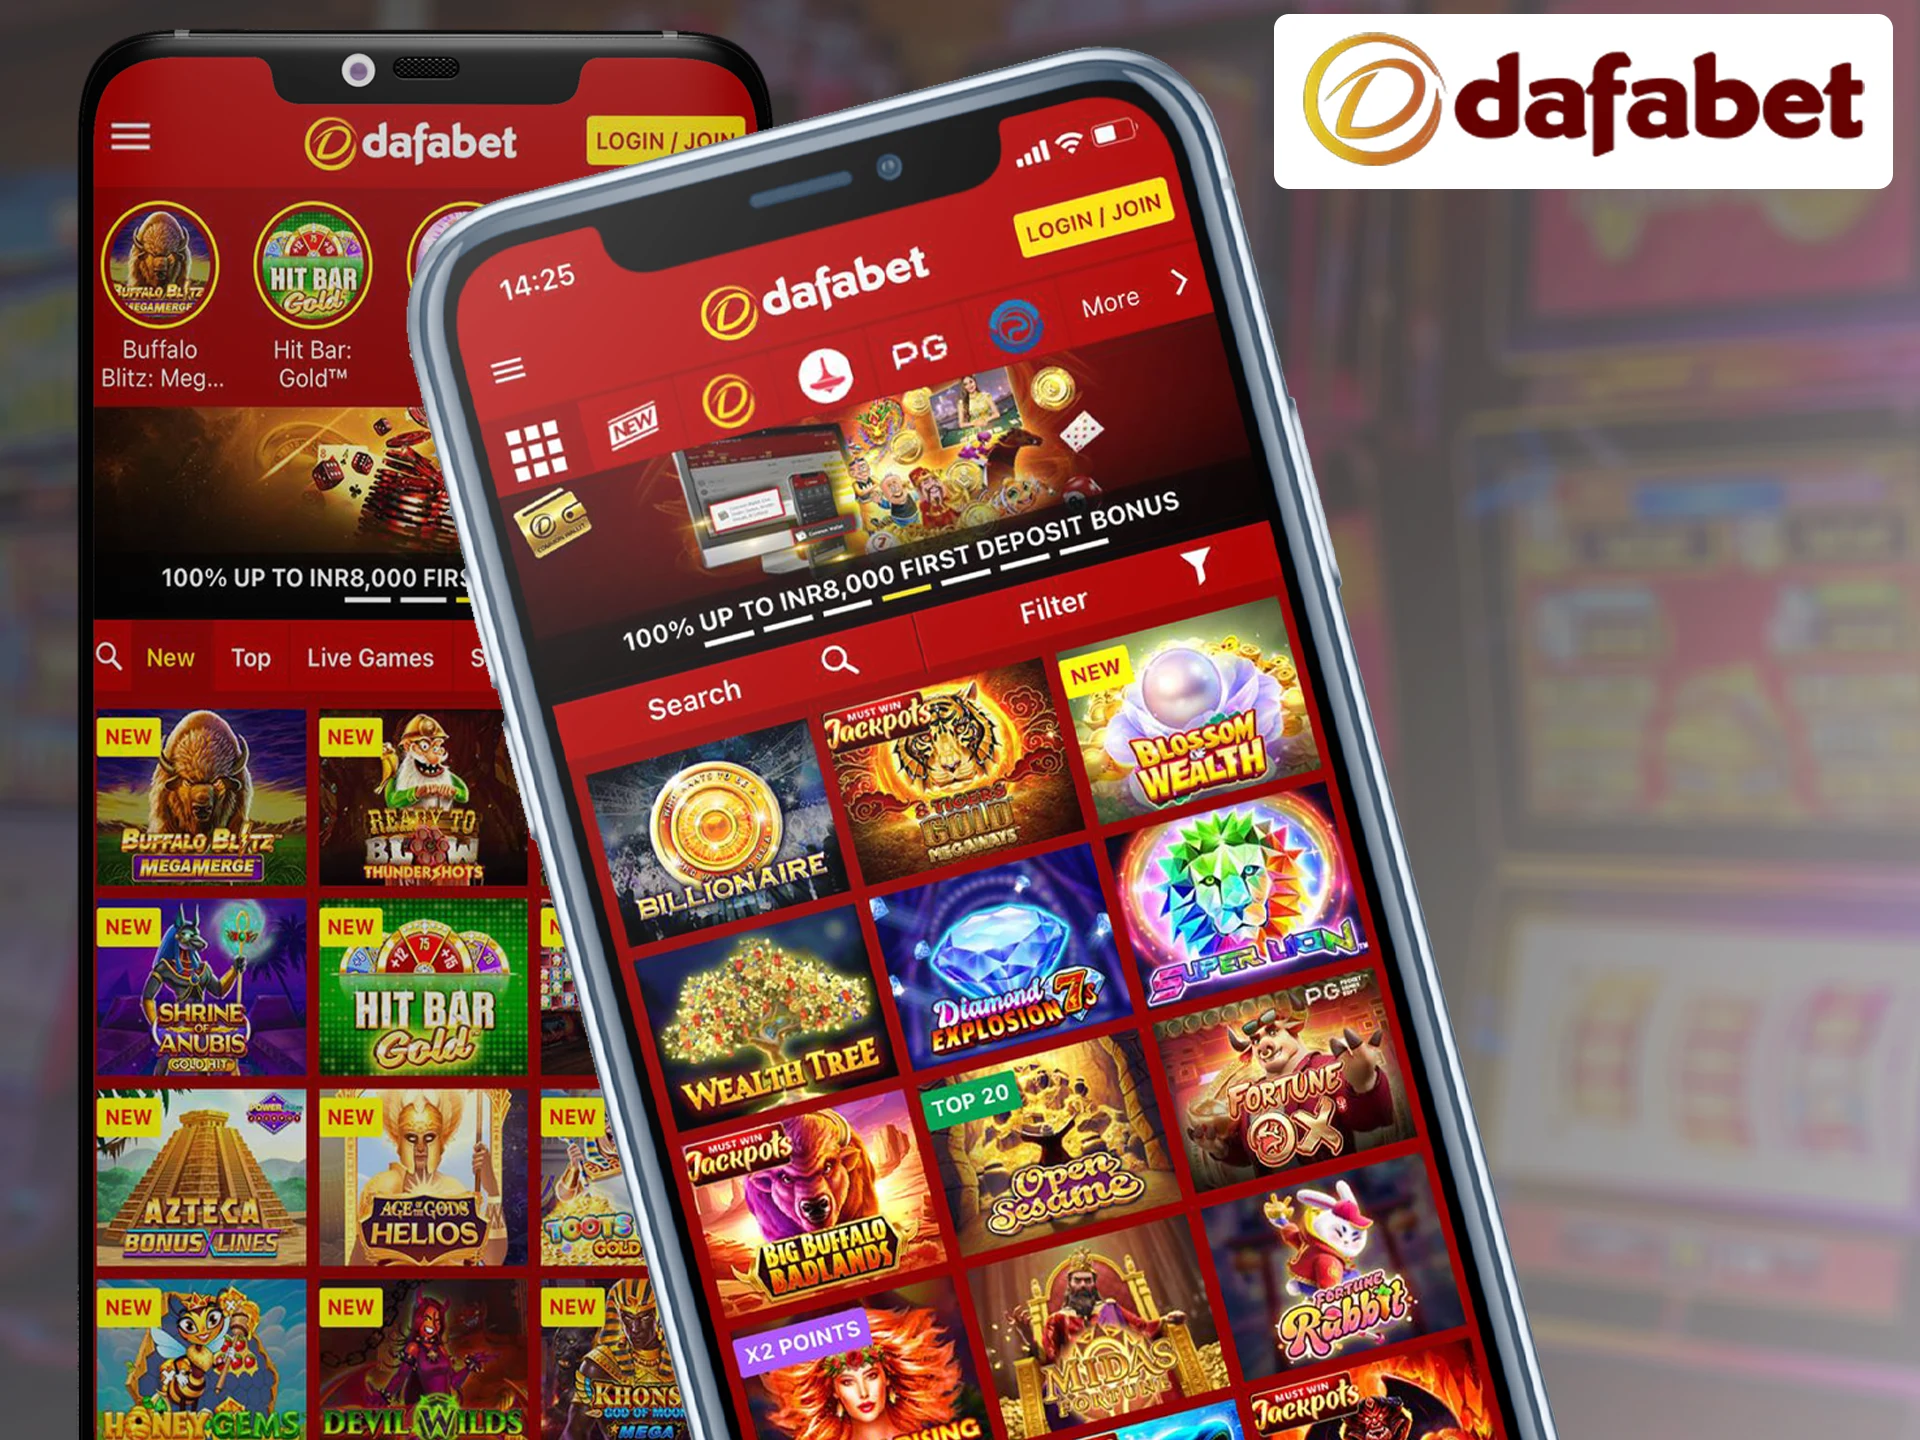 Install the Dafabet app on any of your mobile devices.